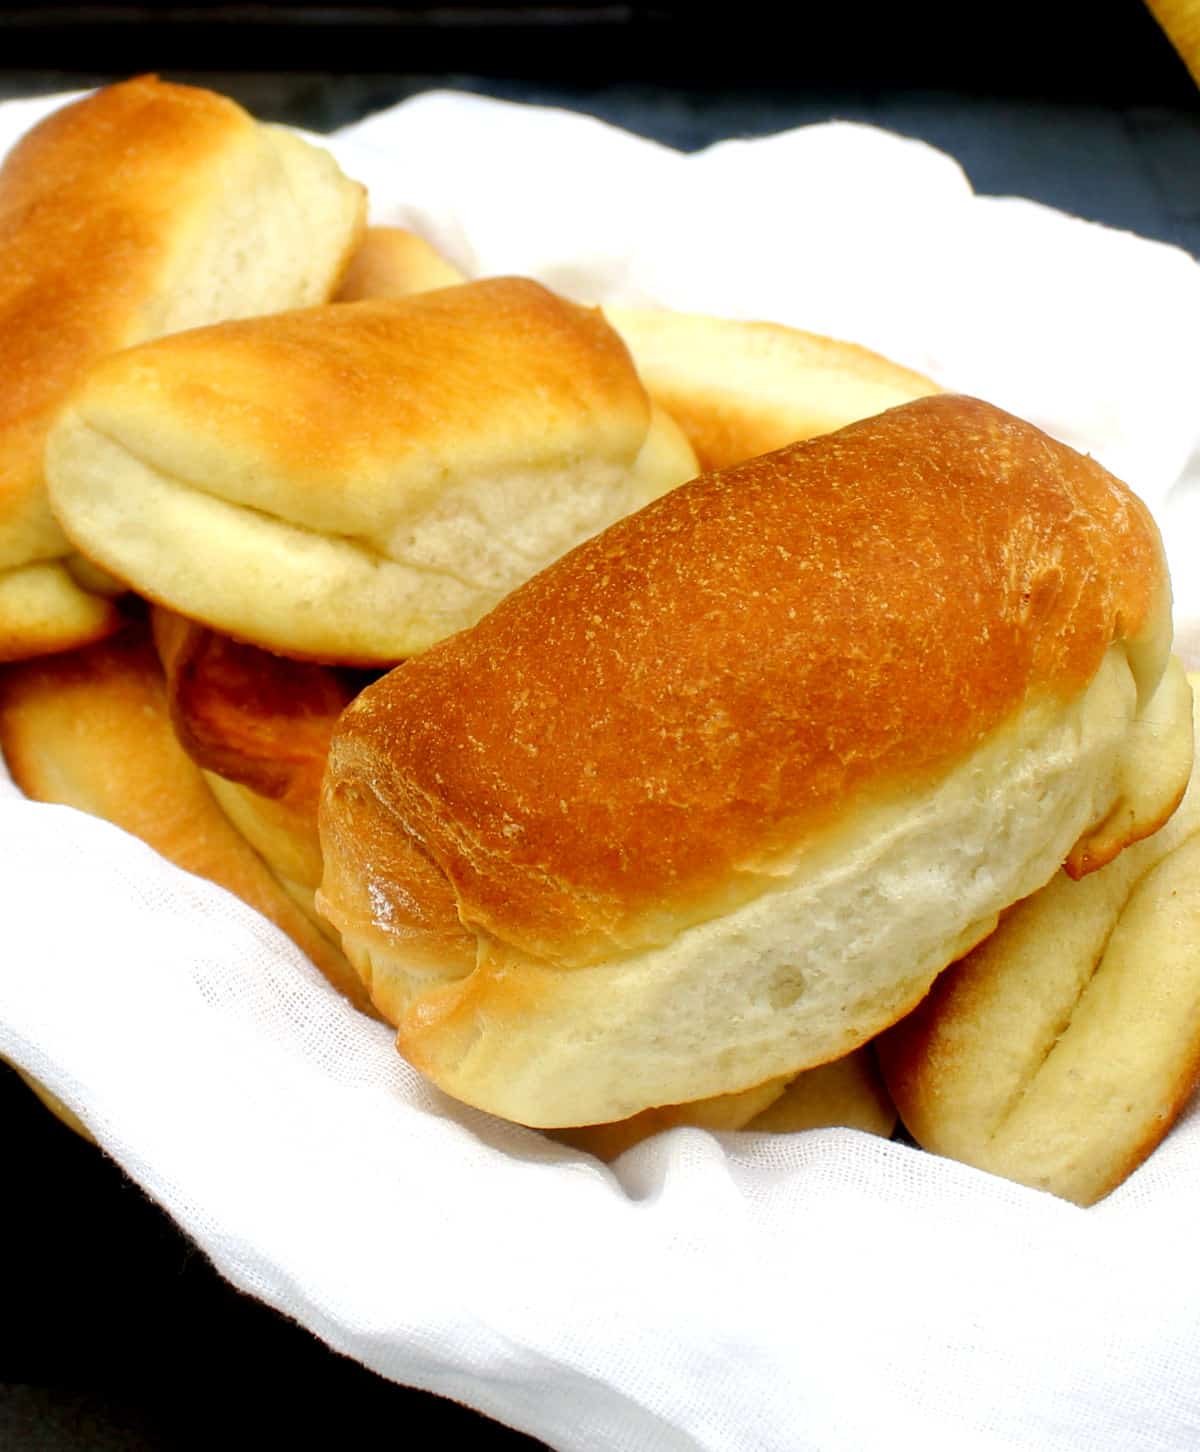 Vegan Parker House rolls nestled in a bread basket lined with a white flour sack cloth.